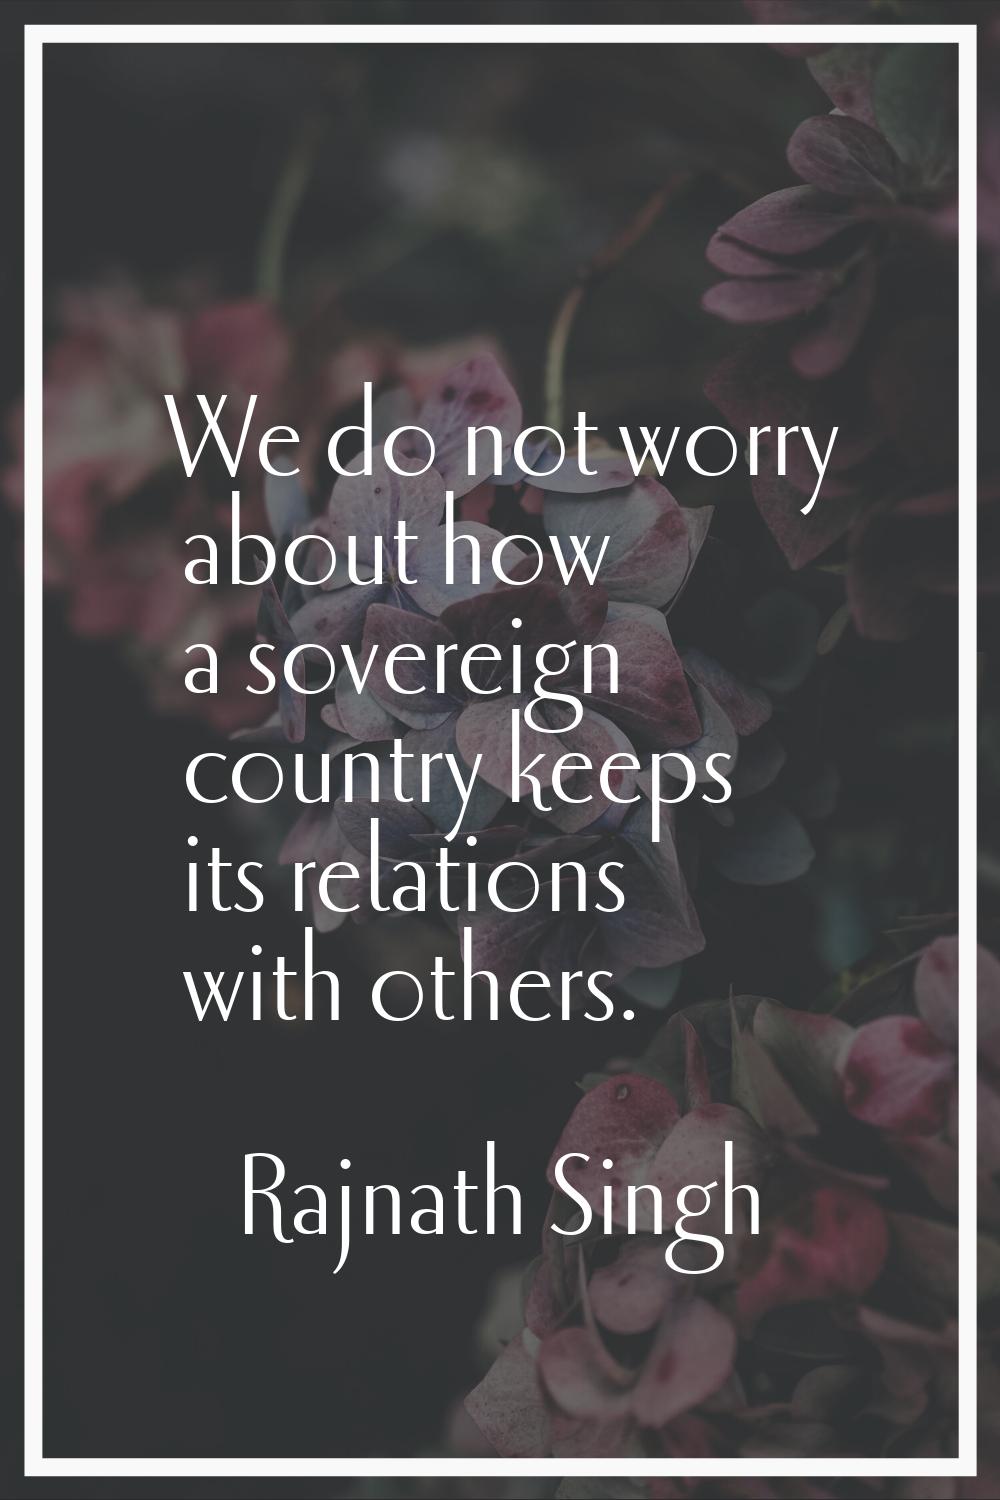 We do not worry about how a sovereign country keeps its relations with others.